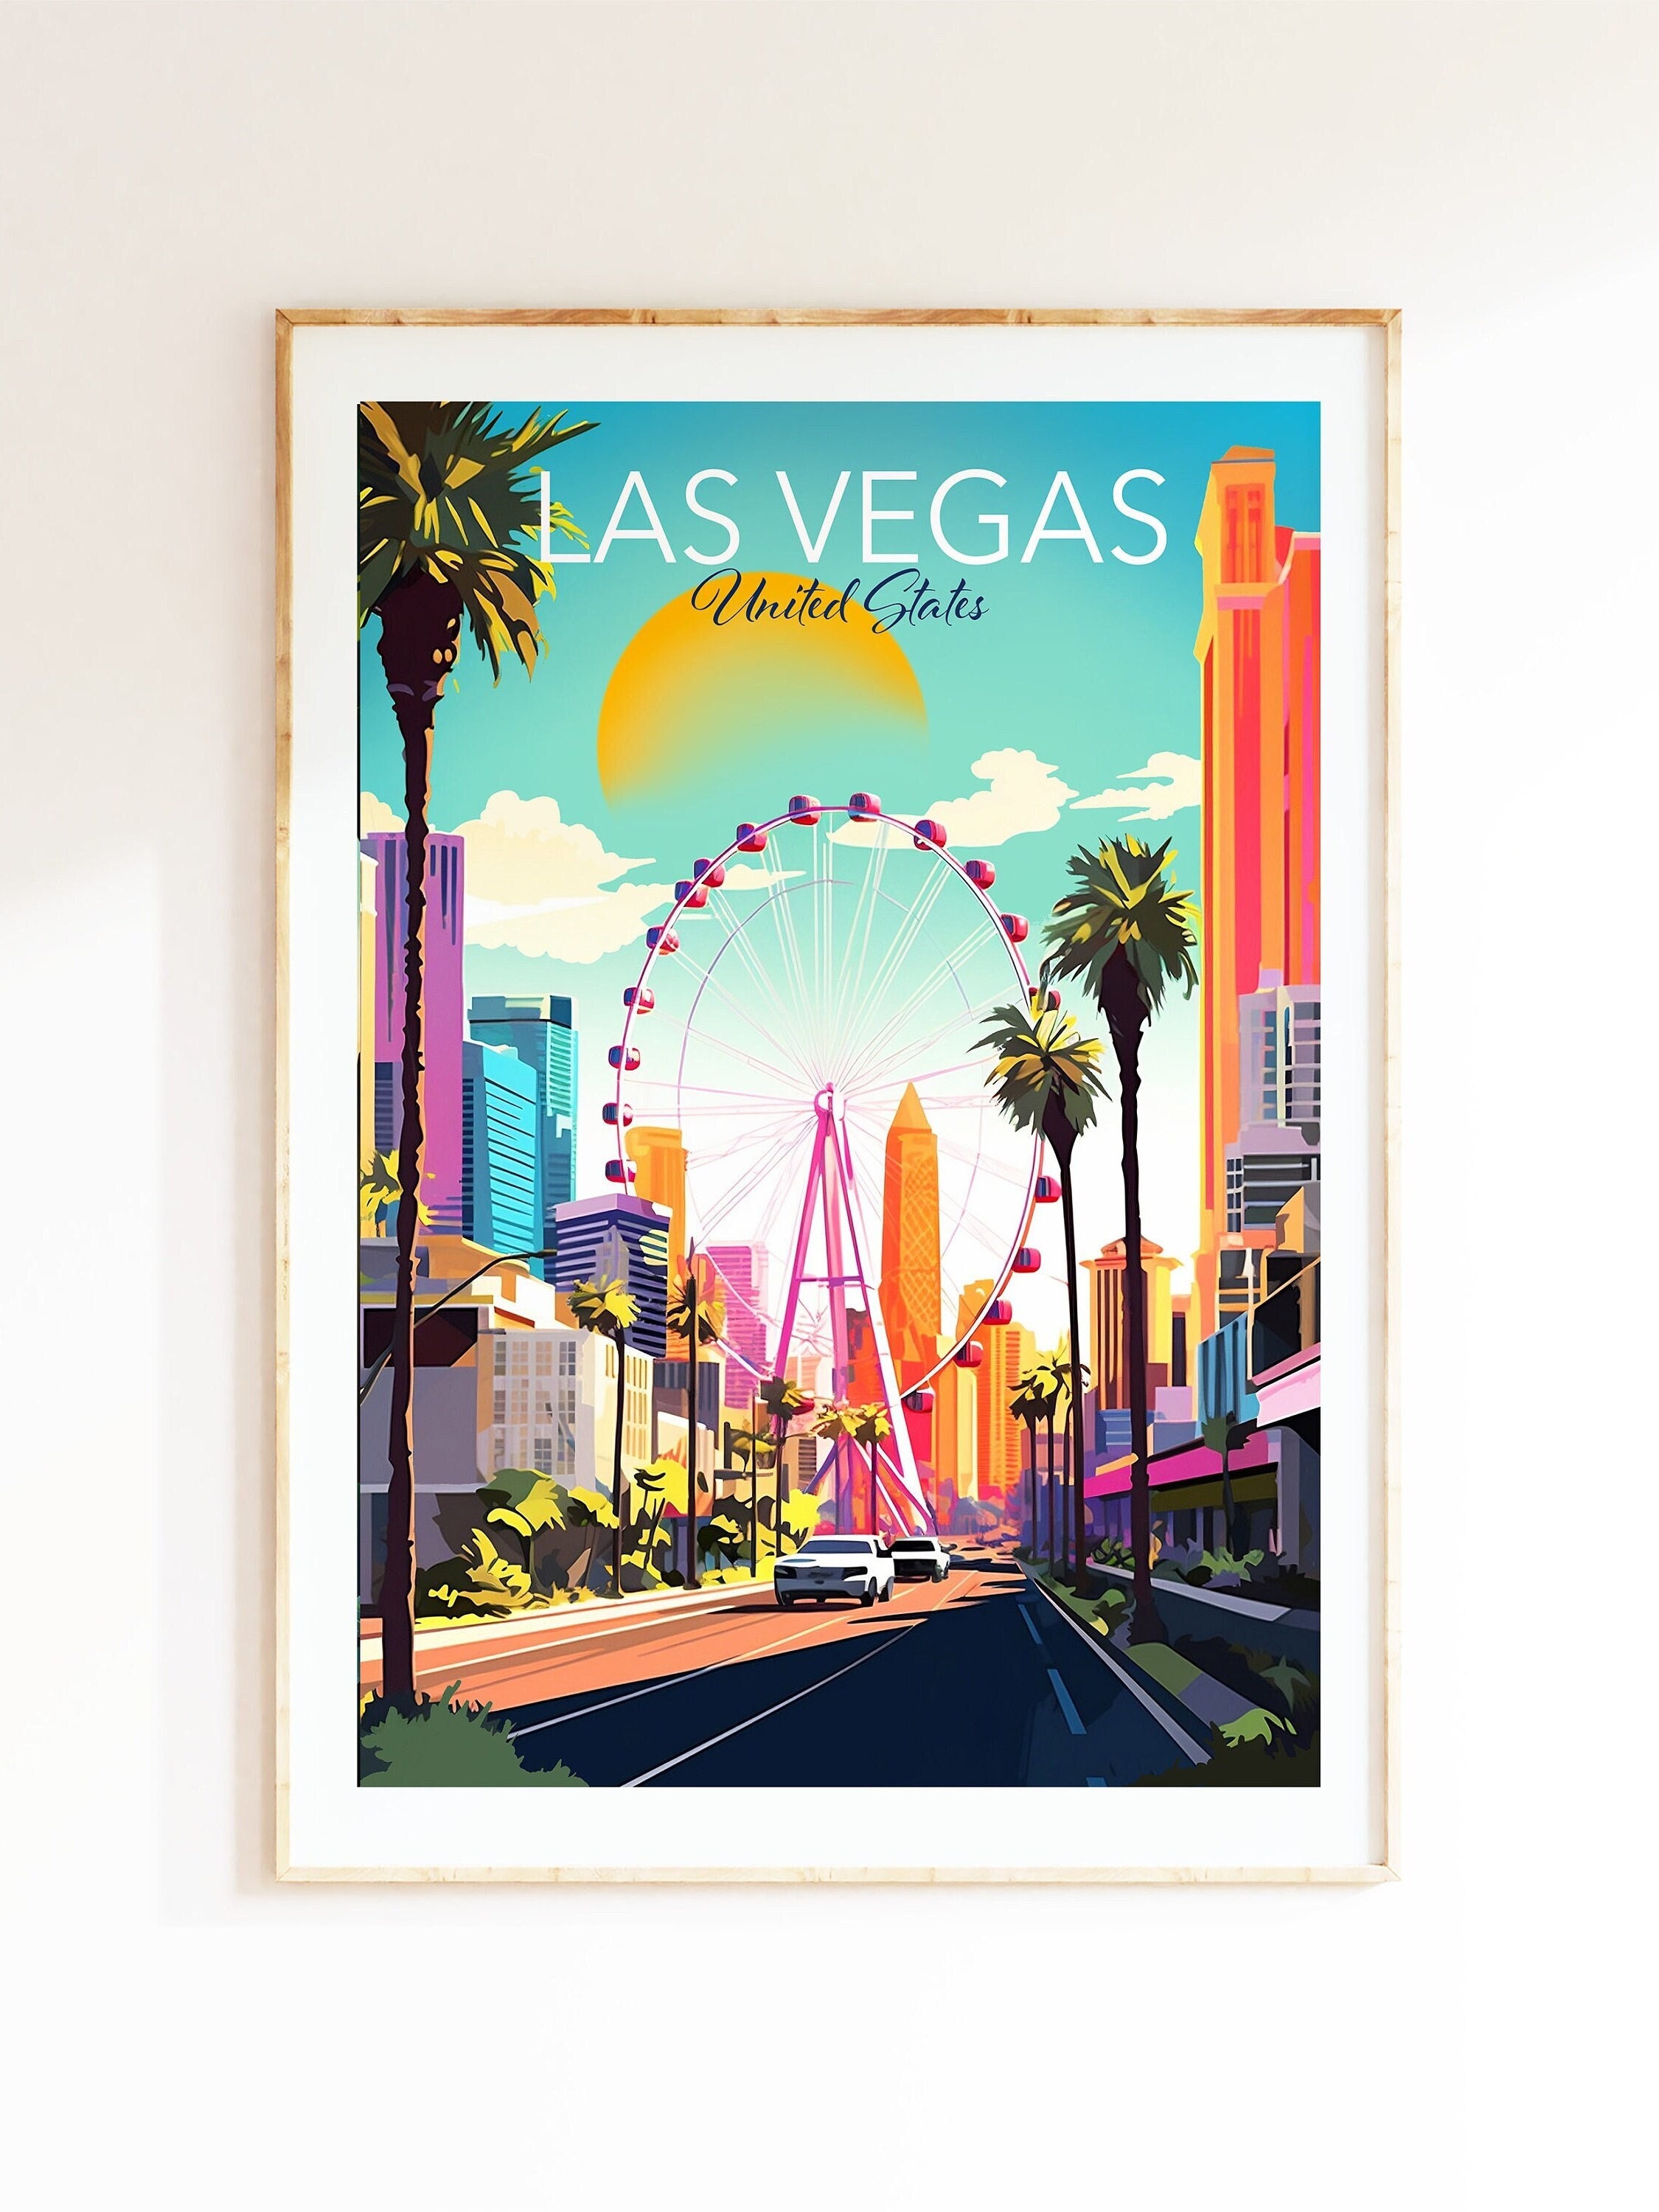 To celebrate its birthday, Vegas lights vintage signs instead of candles:  Travel Weekly